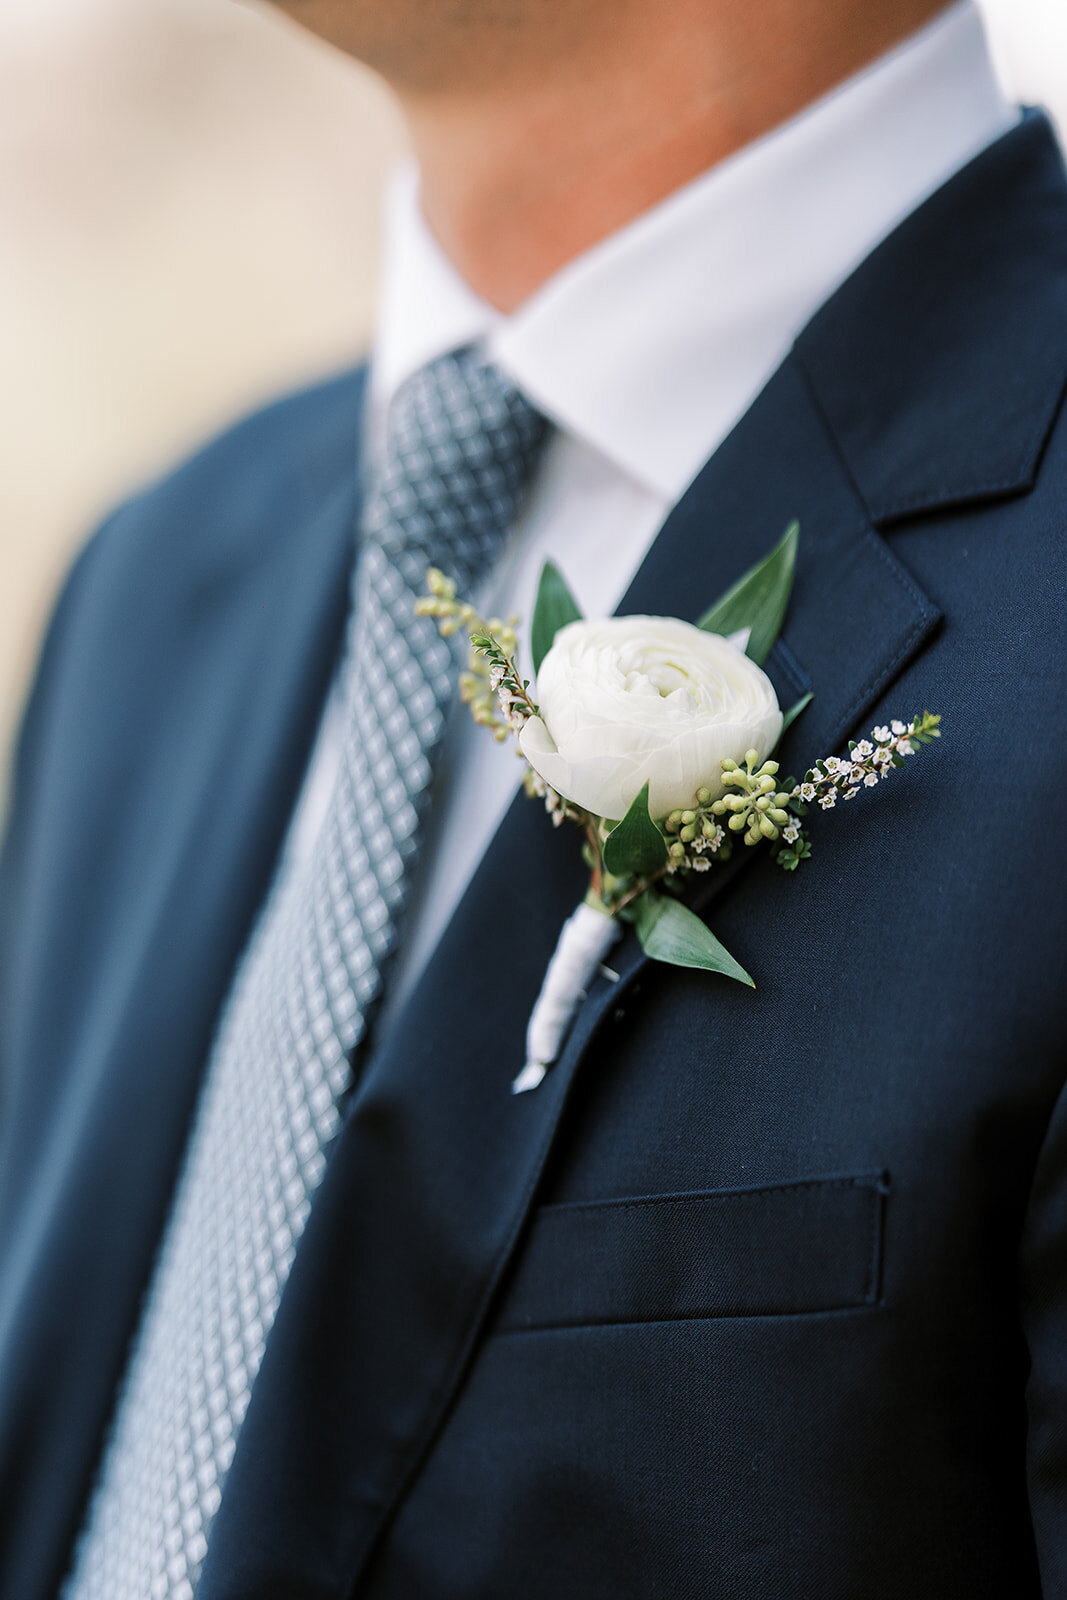 White ranunculus boutonniere with ruscus on blue suit jacket